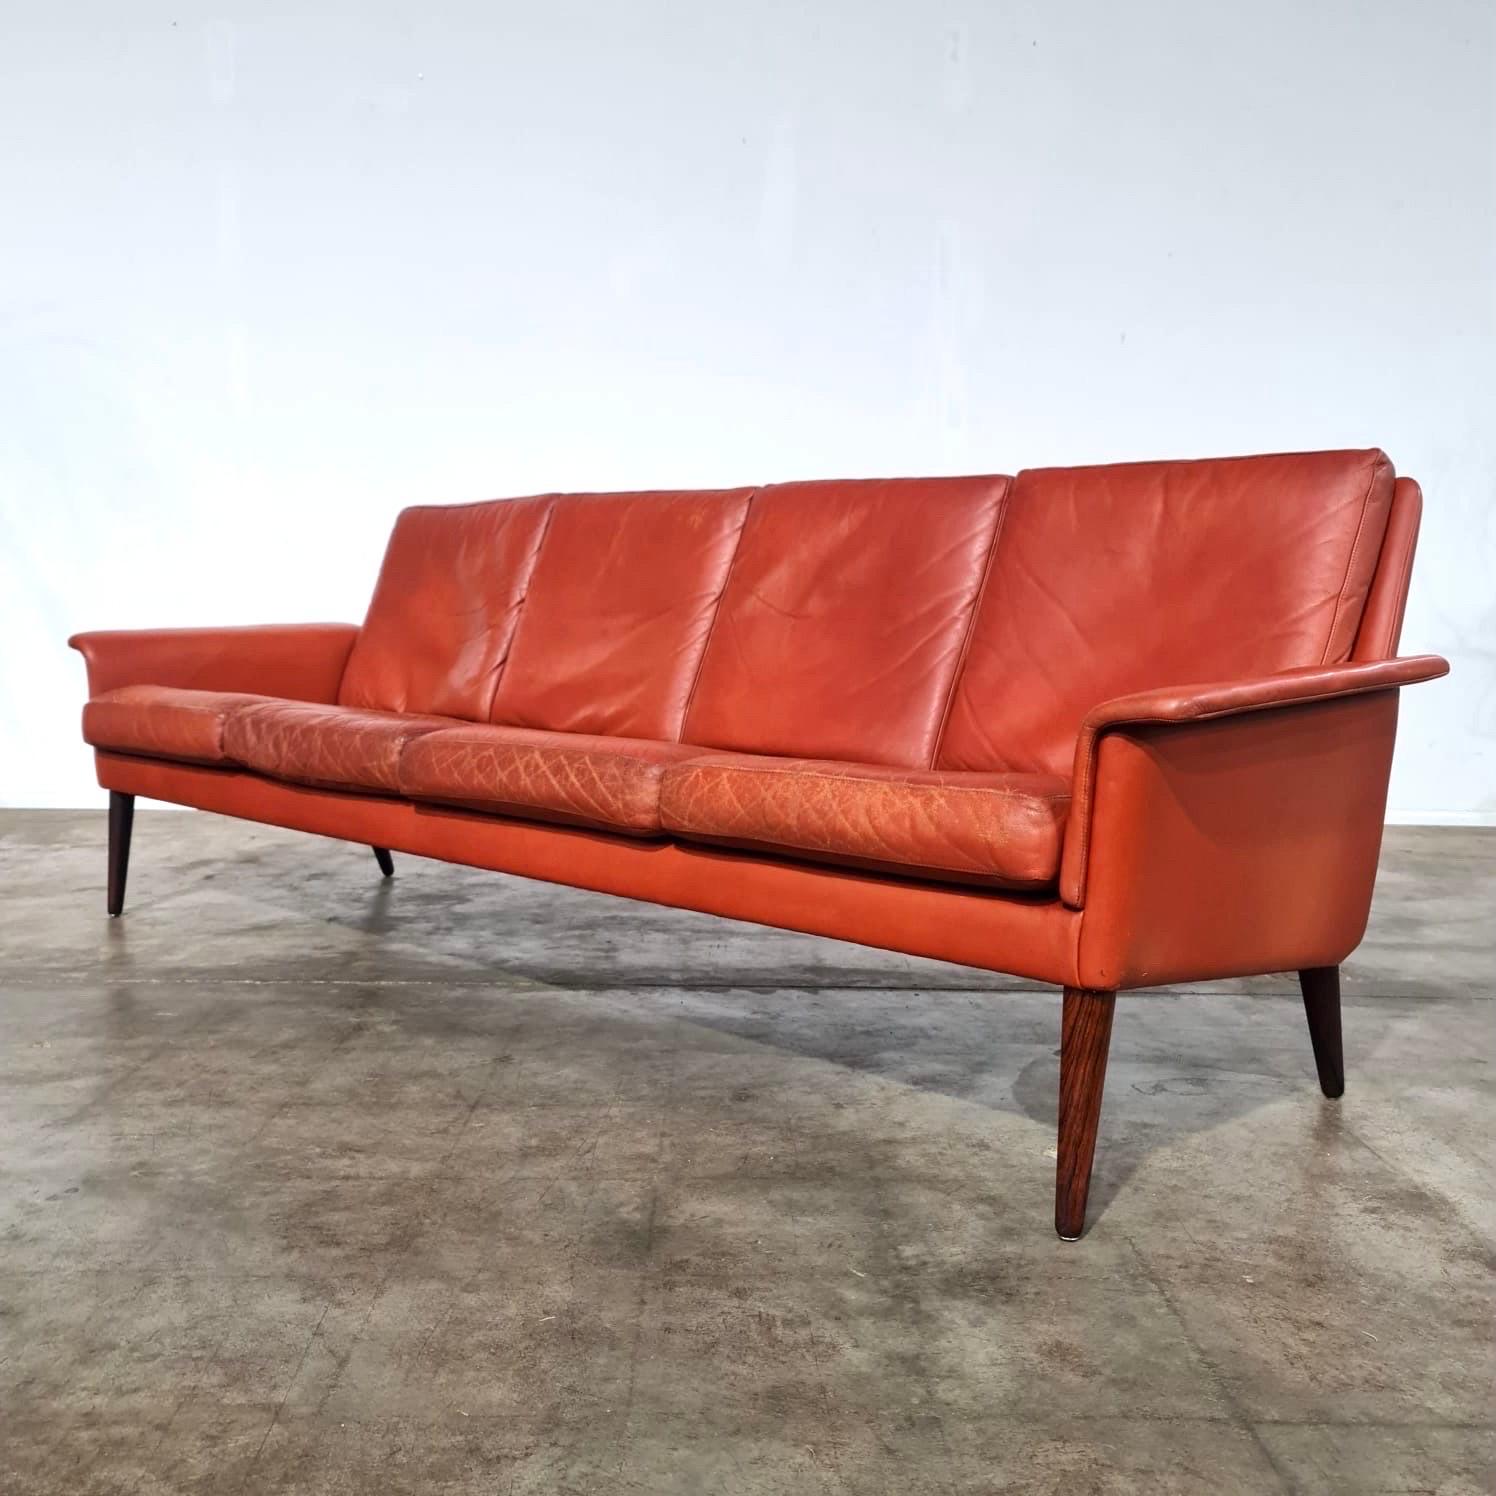 1960's Borge Mogensen Leather Sofa. 

Cushions have recently been refilled with additional padding. The Leather has been Cleaned and conditioned. Defiantly superficial signs of use but nothing too serious.

Dm for more info/ photos

H 78cm, W82cm, L